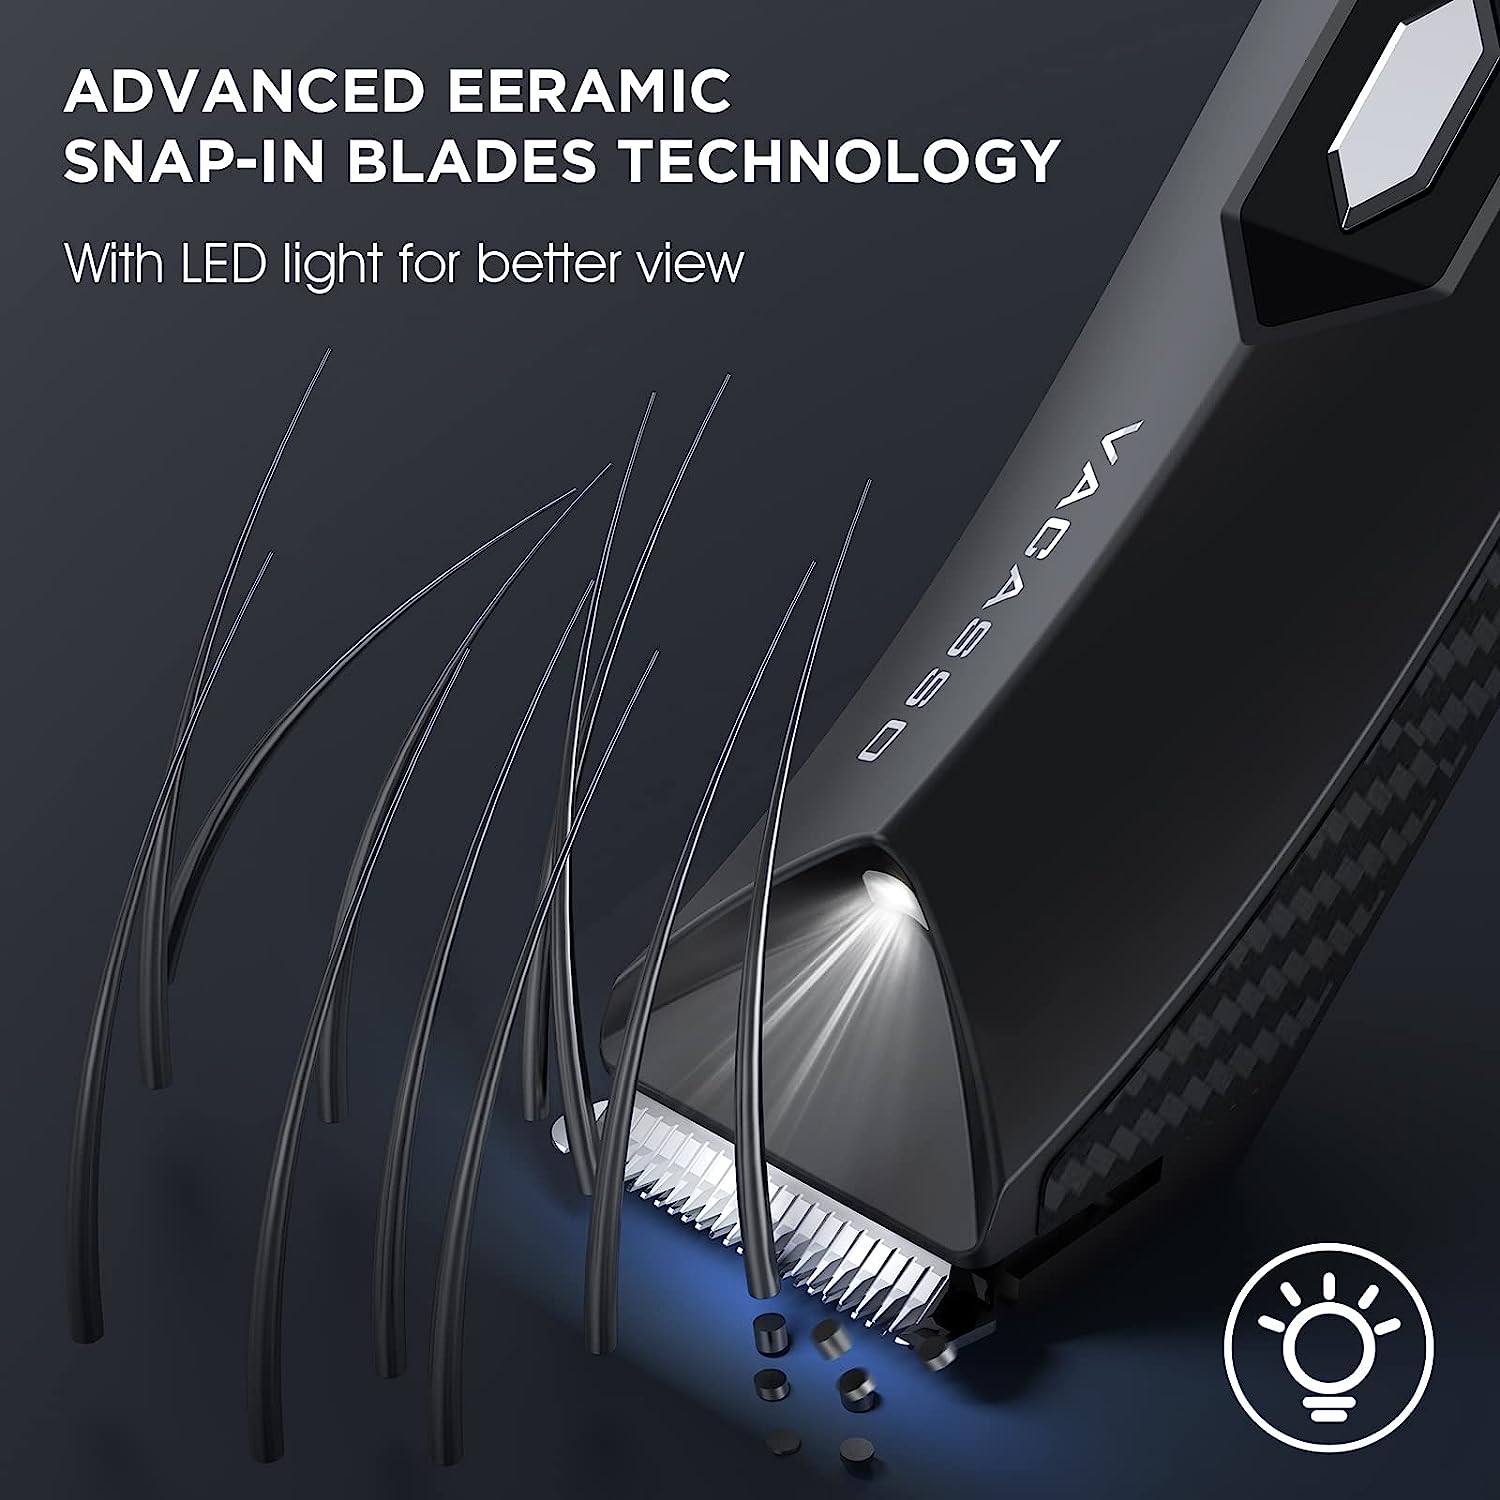 ADVANCED EERAMIC SNAP-IN BLADES TECHNOLOGY With LED light for better view